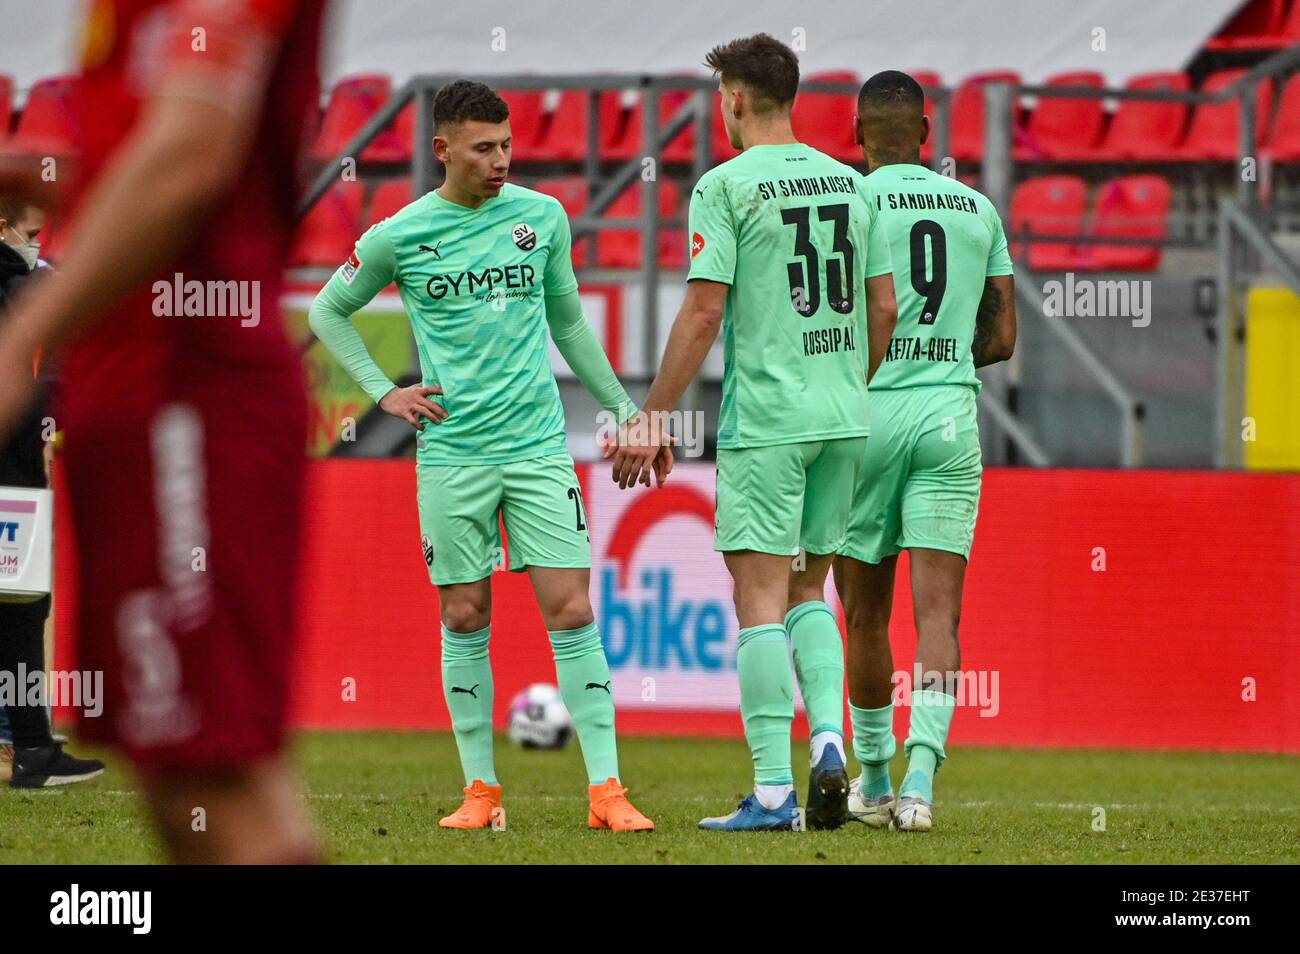 17 January 2021, Bavaria, Regensburg: Football: 2. Bundesliga, Jahn Regensburg - SV Sandhausen, Matchday 16. Enrique Peña Zauner of Sandhausen (l-r), Alexander Rossipal of Sandhausen and Daniel Keita-Ruel of Sandhausen stand disappointed on the pitch after the match against Regensburg lost 3:1. Photo: Armin Weigel/dpa - IMPORTANT NOTE: In accordance with the regulations of the DFL Deutsche Fußball Liga and/or the DFB Deutscher Fußball-Bund, it is prohibited to use or have used photographs taken in the stadium and/or of the match in the form of sequence pictures and/or video-like photo series. Stock Photo